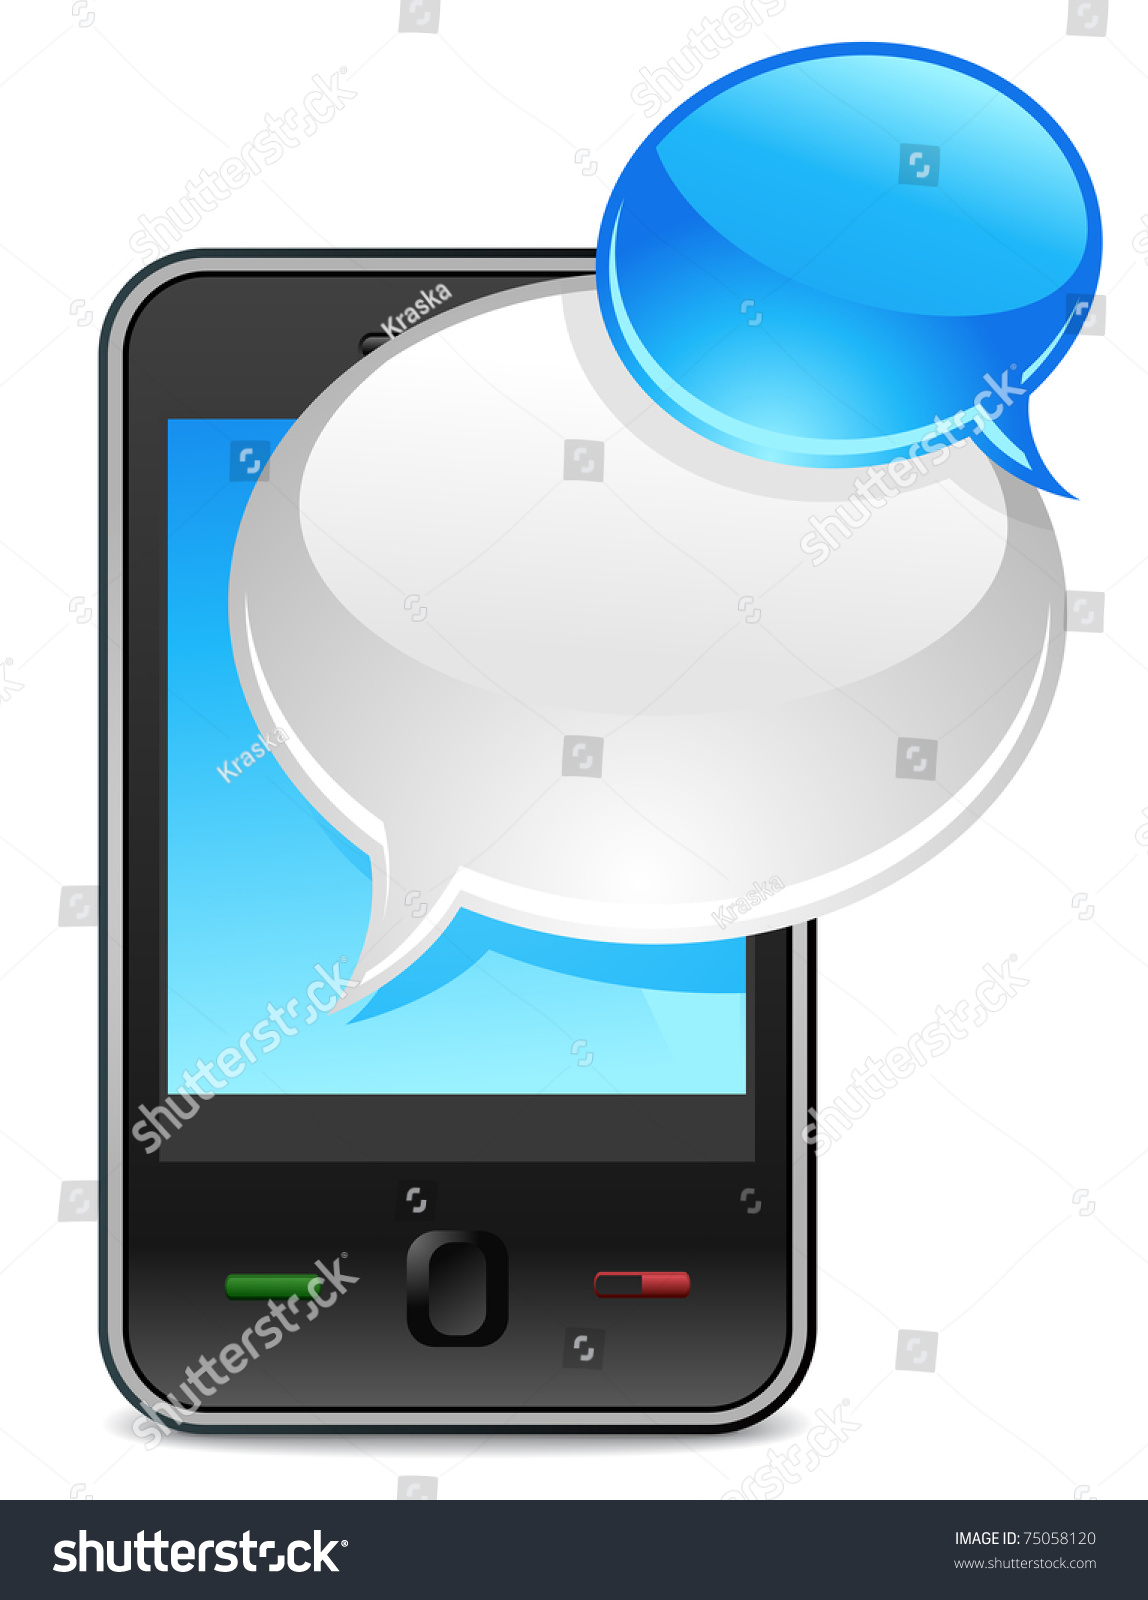 phone message clipart - photo #48